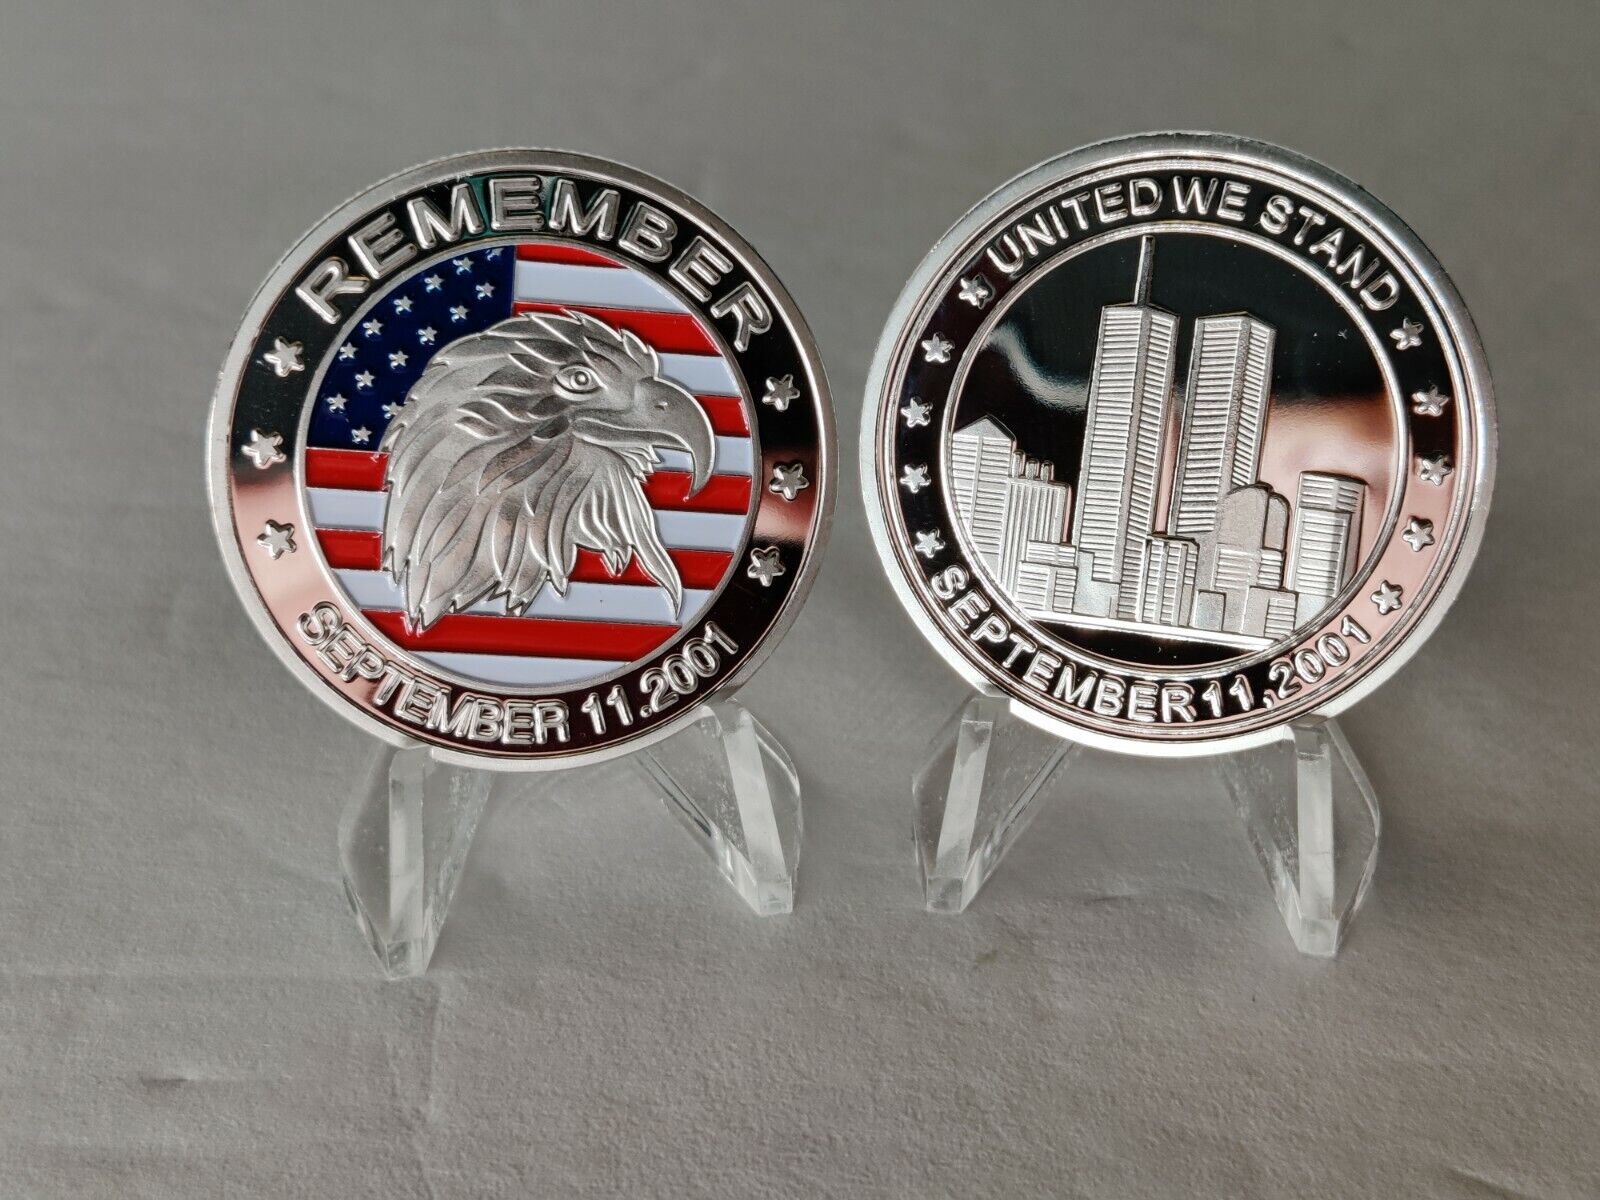 September 11th United We Stand Challenge coin 9/11 Never Forget collectible coin